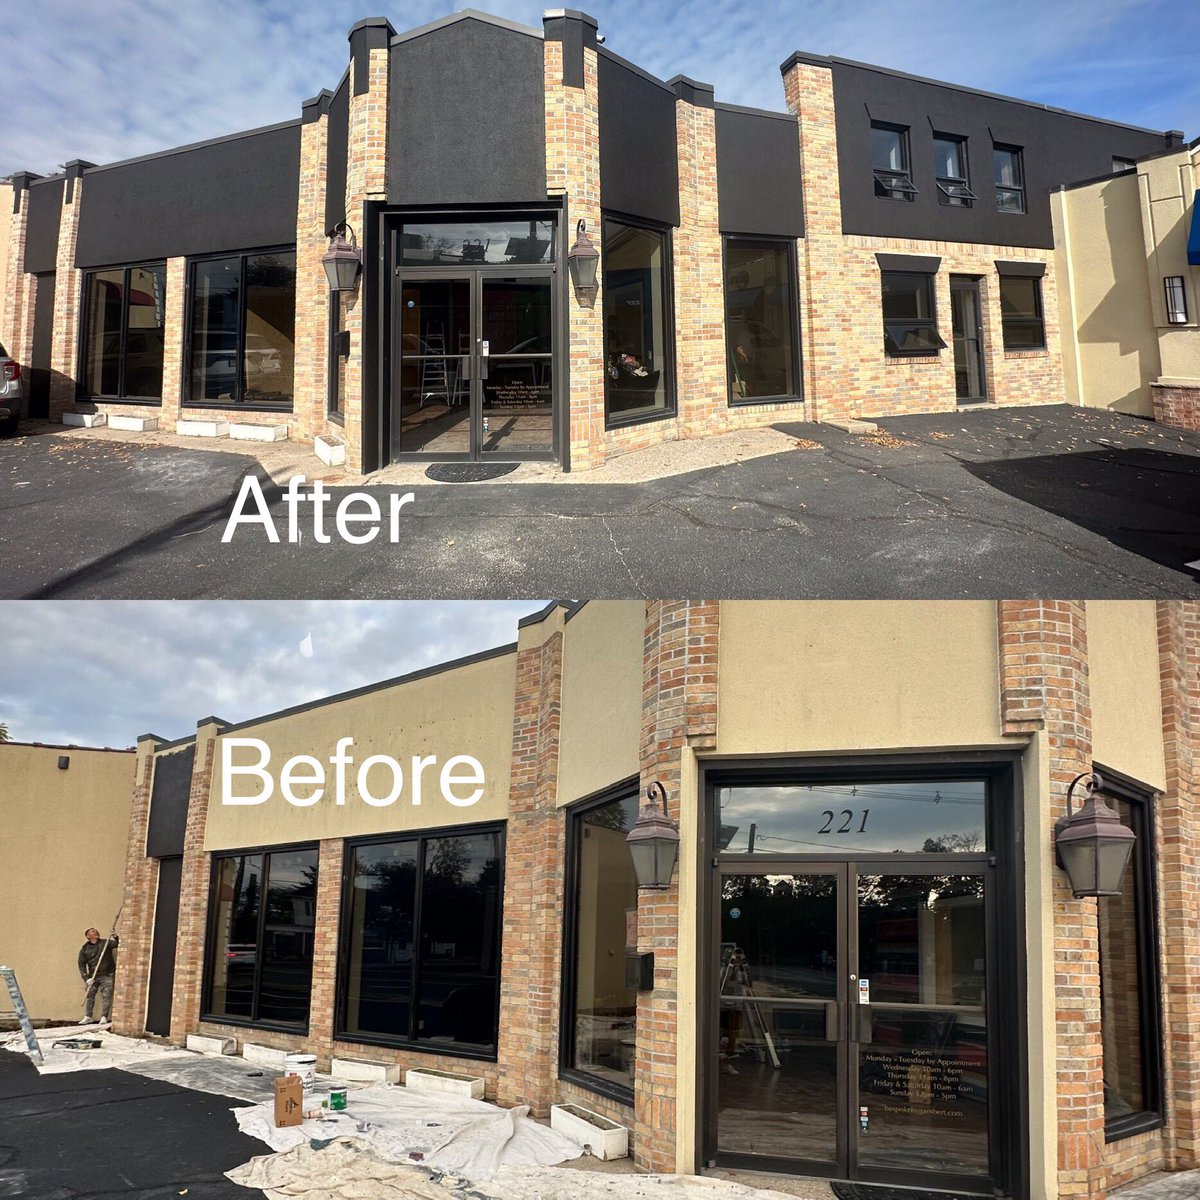 On North Avenue in Westfield, New Jersey. This exterior building is looking wonderful after the Grand Slam crew finished the painting.  🎨

All ready for the business to open. 🏢

grandslampaintingllc.com
.
.
.
.
.
.
#nickMarino #grandslampainting #benjaminmoorepainter #shoplocal